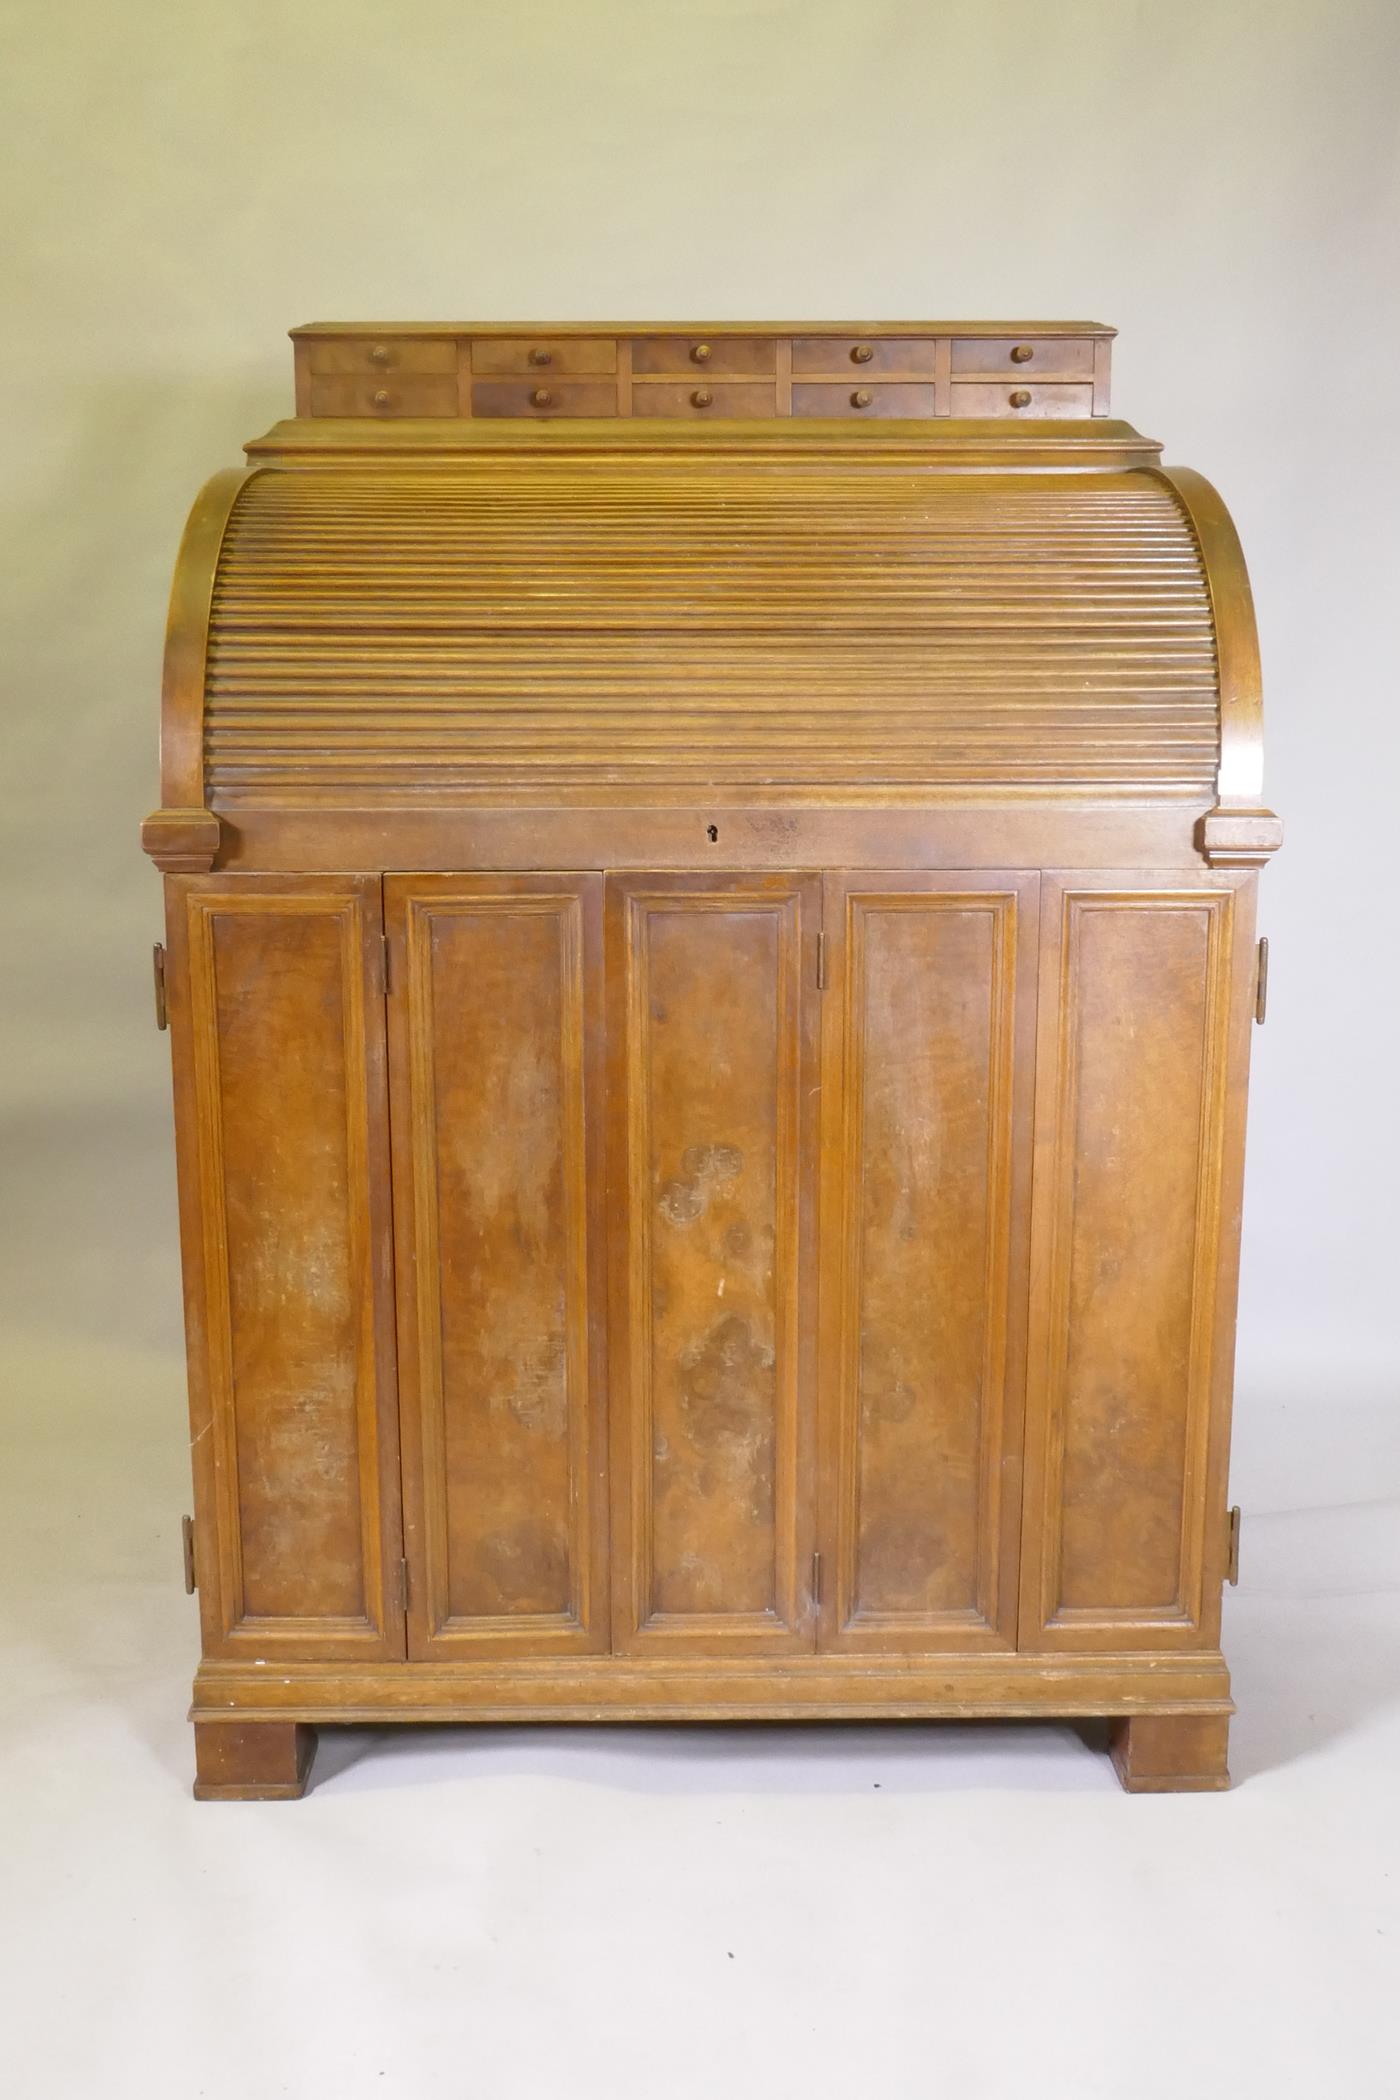 A late C19th/early C20th walnut tobacconist's shop cabinet, the roll top opening to reveal drawers